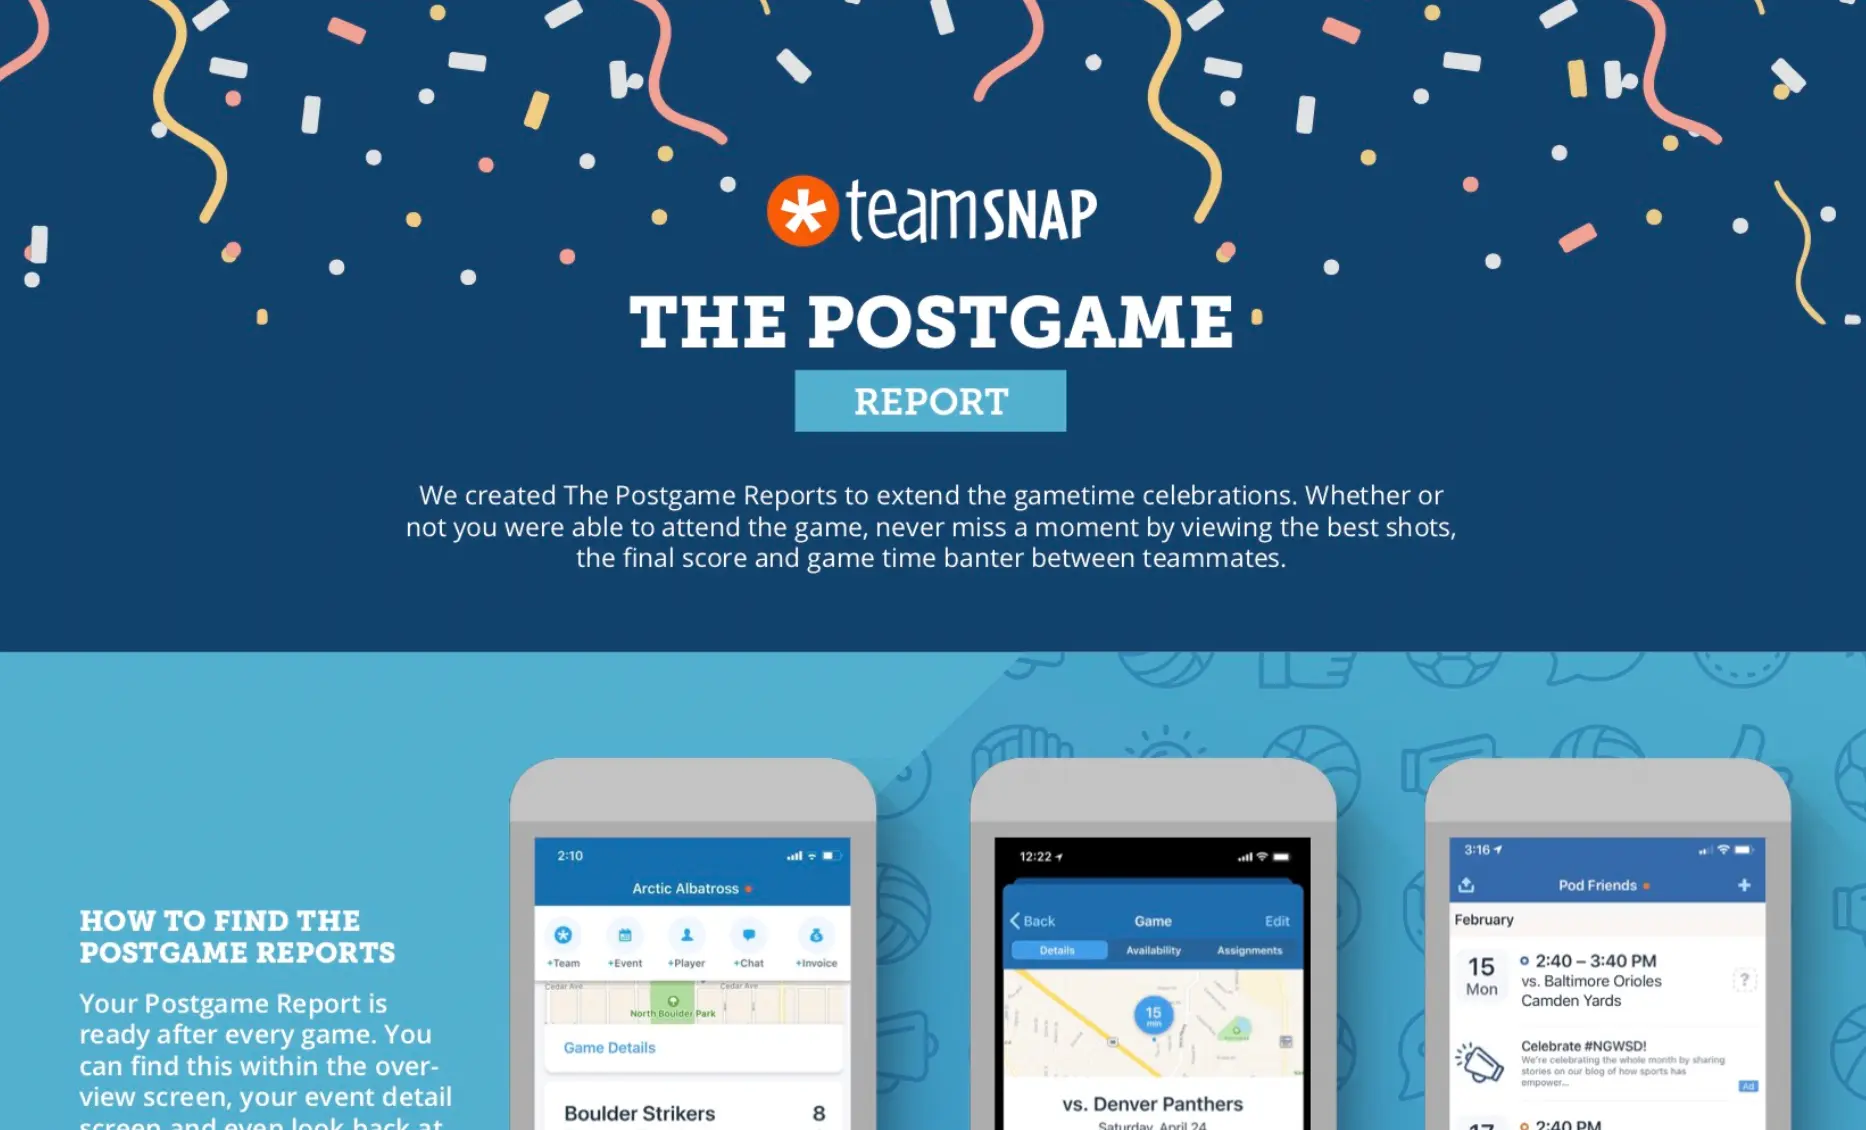 Featured image: Relive Your Favorite Gameday Moments With the TeamSnap Postgame Report!